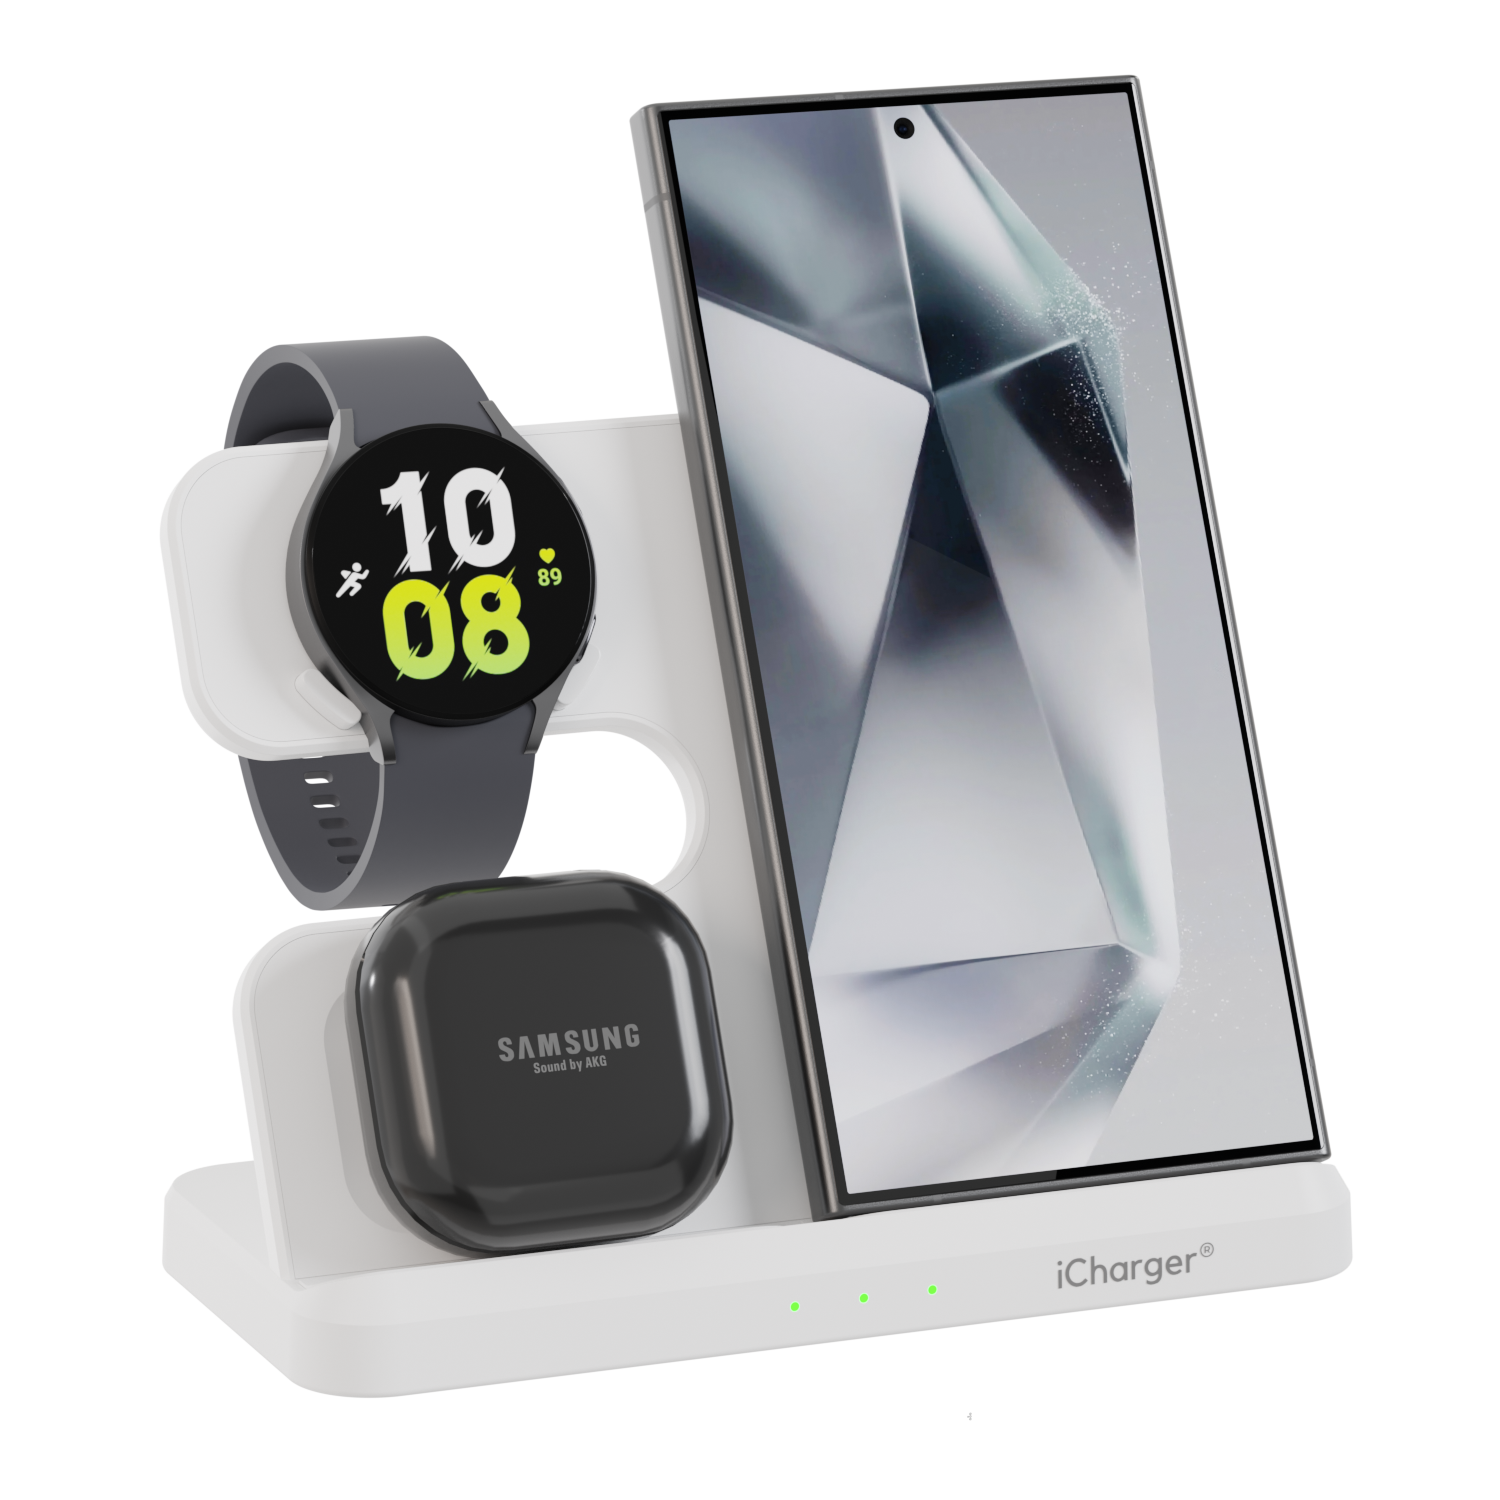 White iCharger Samsungs edition 3-in-1 Qi wireless charging station with a Samsung smartphone and smartwatch, elegant charging solution